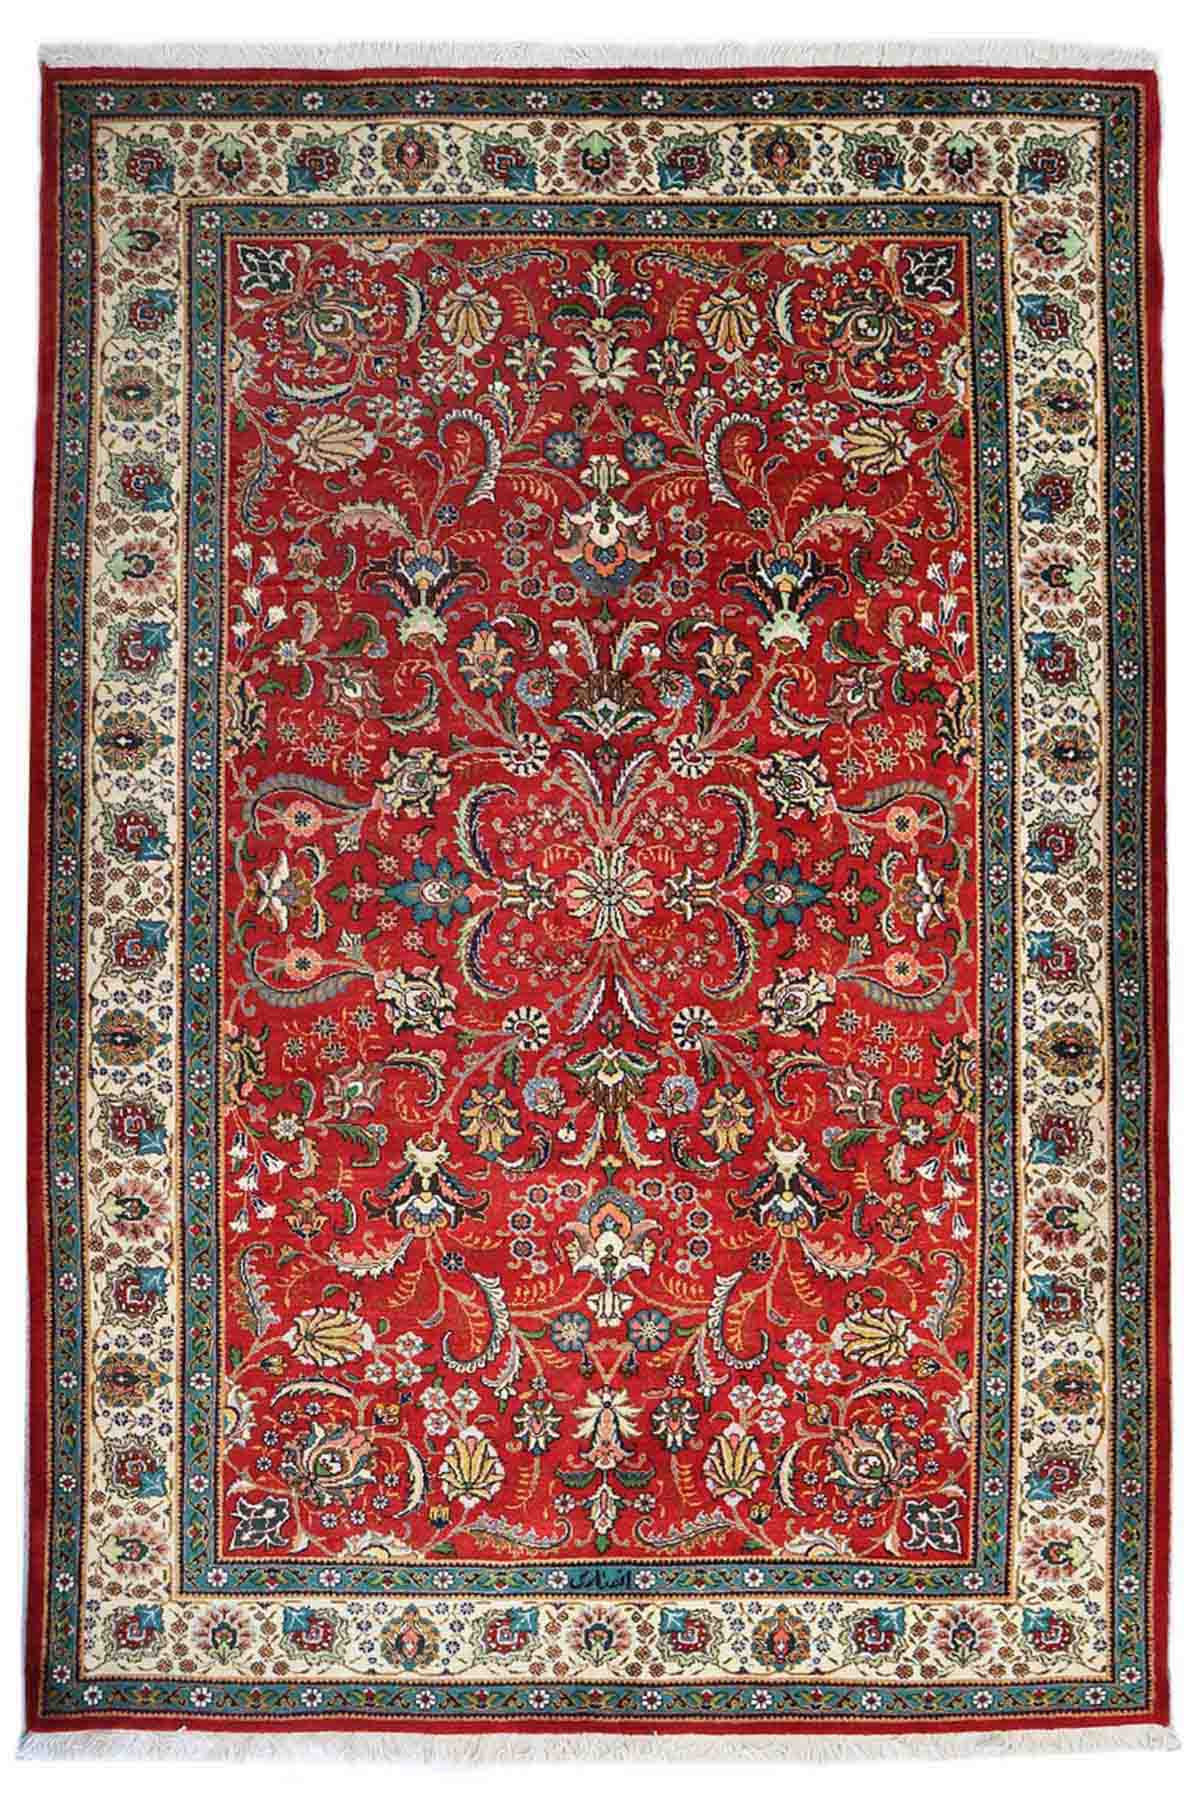 Authentic-Persian-Rugs-in-Melbourne